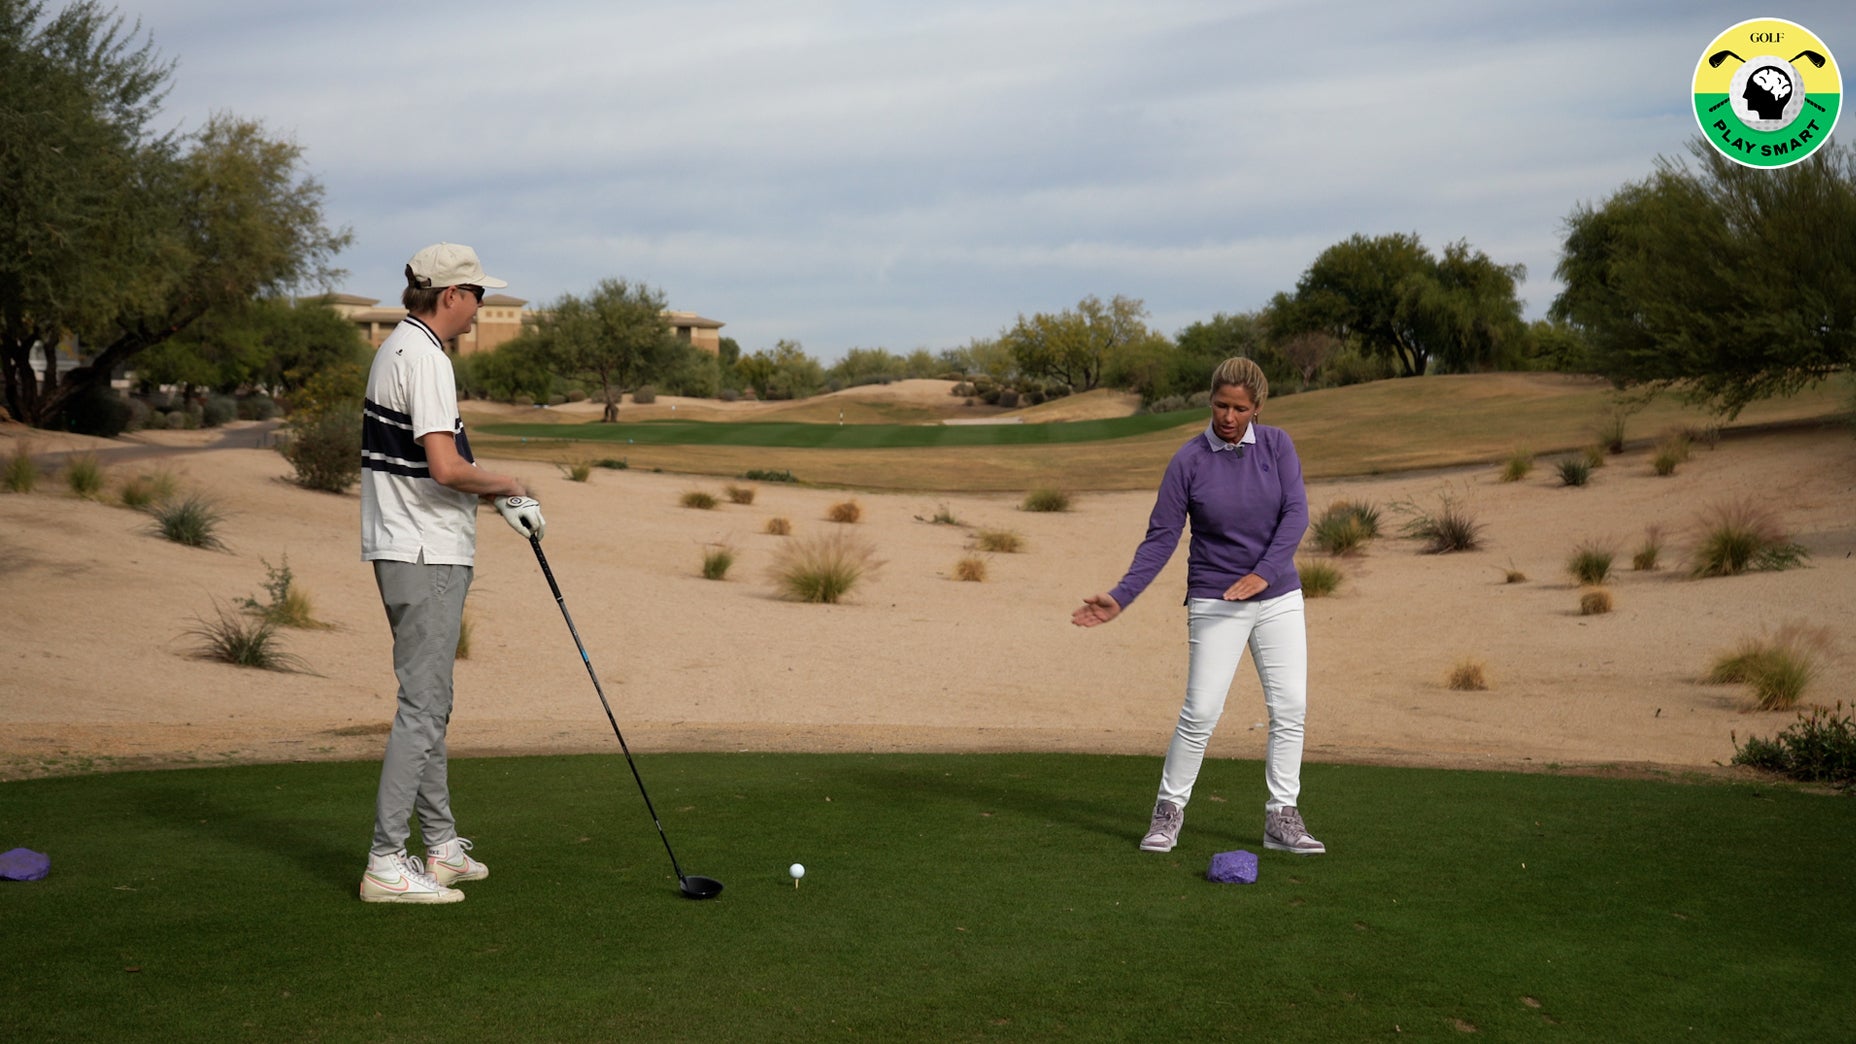 sarah stone demonstrates swing tip to GOLF editor zephyr melton on a tee box